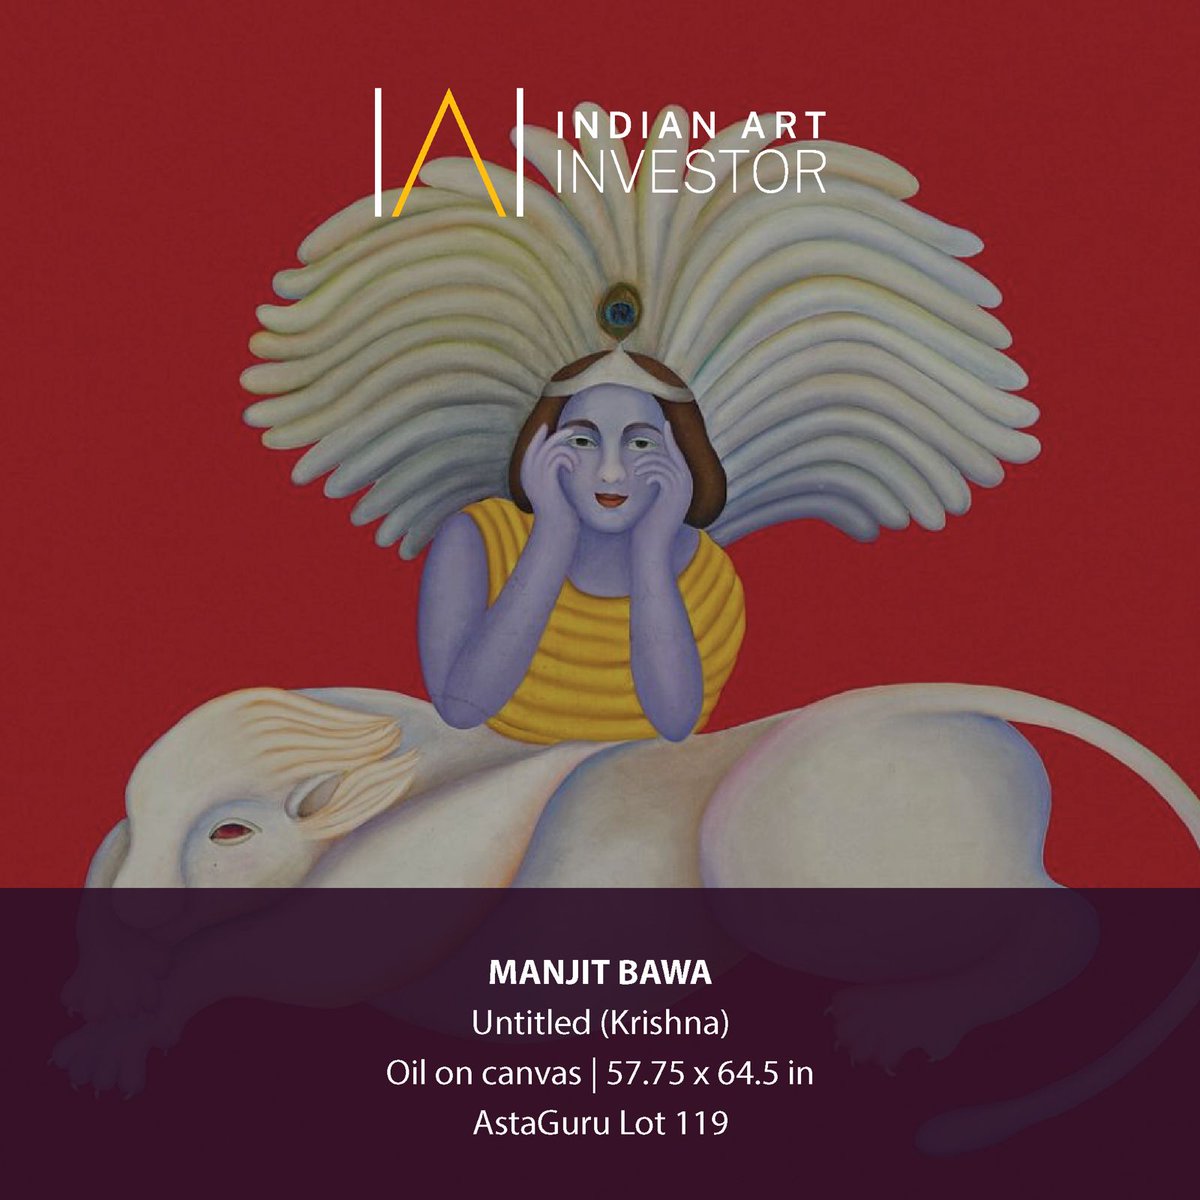 Did you know? Manjit Bawa’s Untitled (Krishna) is the second most expensive artwork sold at auction in Q3FY24.
.
#indianartmarket #investment #artadvisory #artworld #artinvestor #investmentplanning #investmentopportunity #affordableart #affordableinvestment